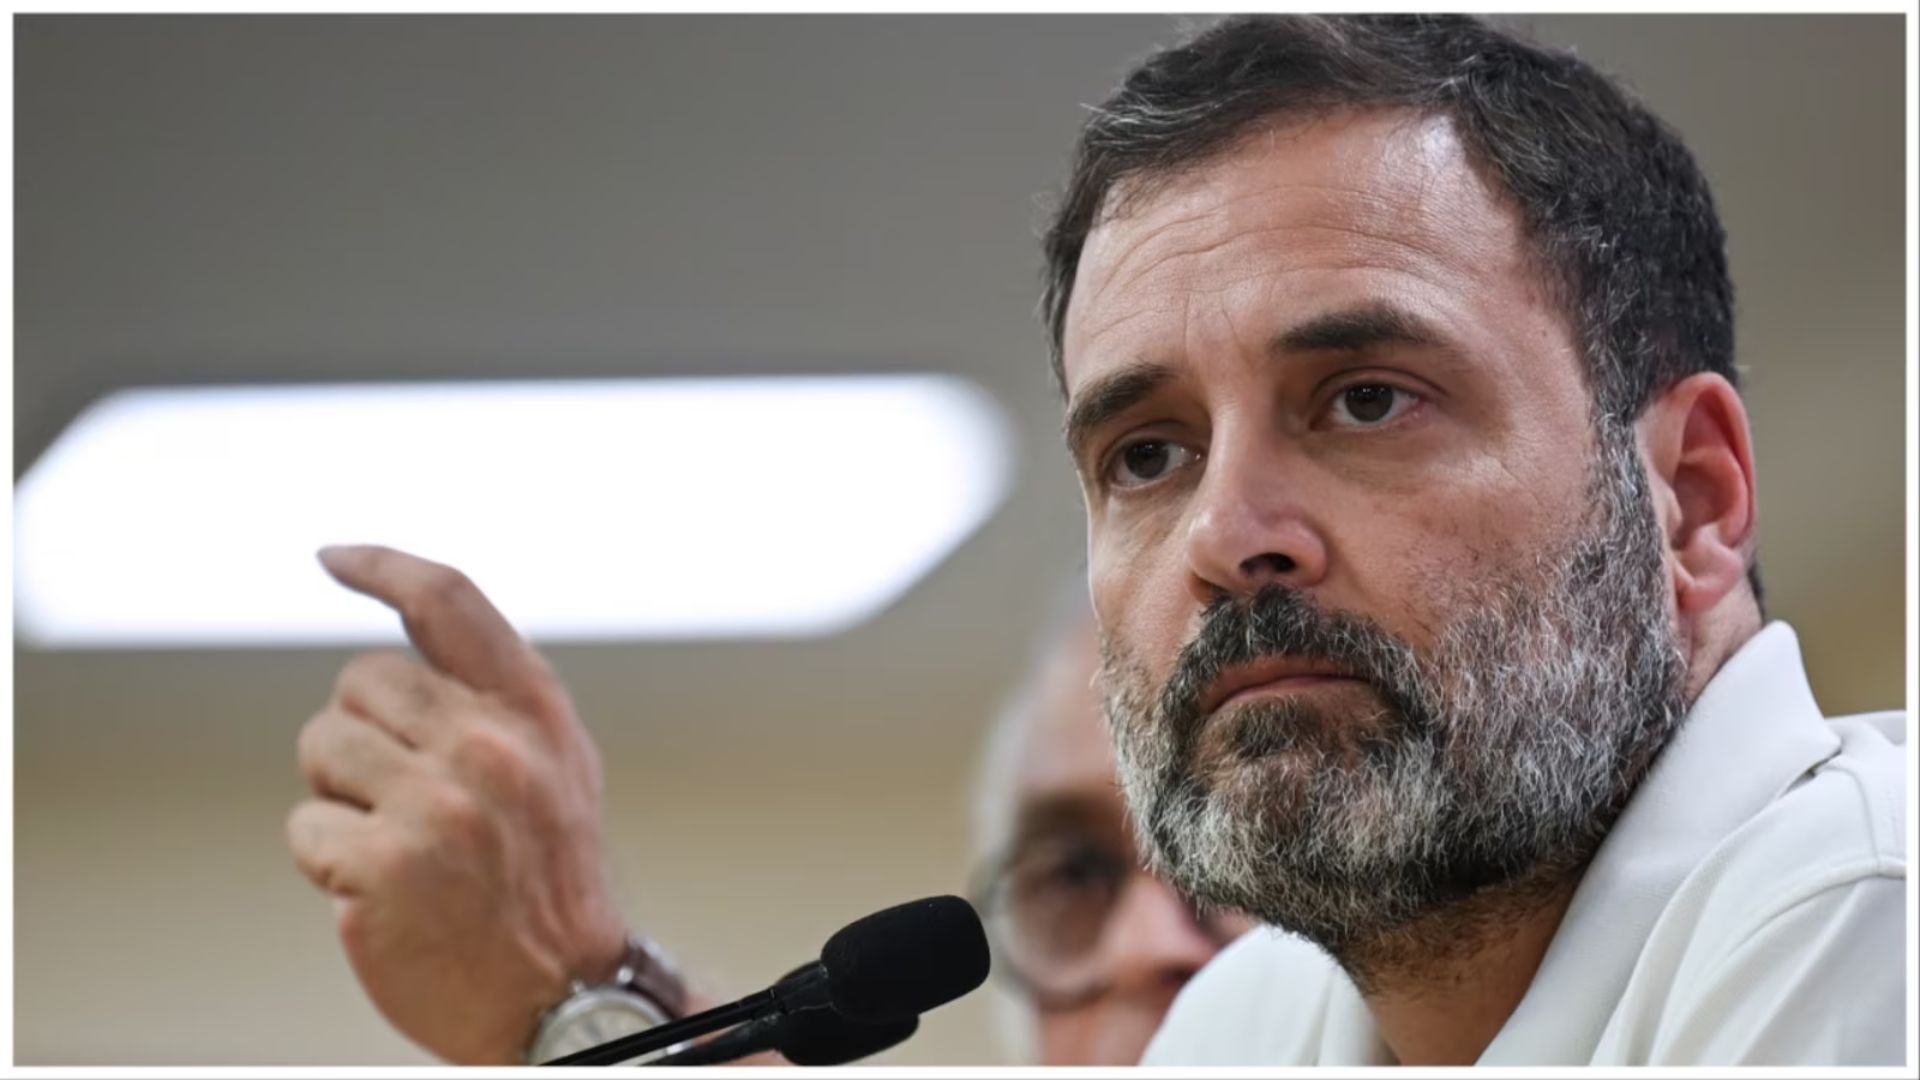 Rahul Gandhi to Offer Legal Aid to Kejriwal’s Family: Sources